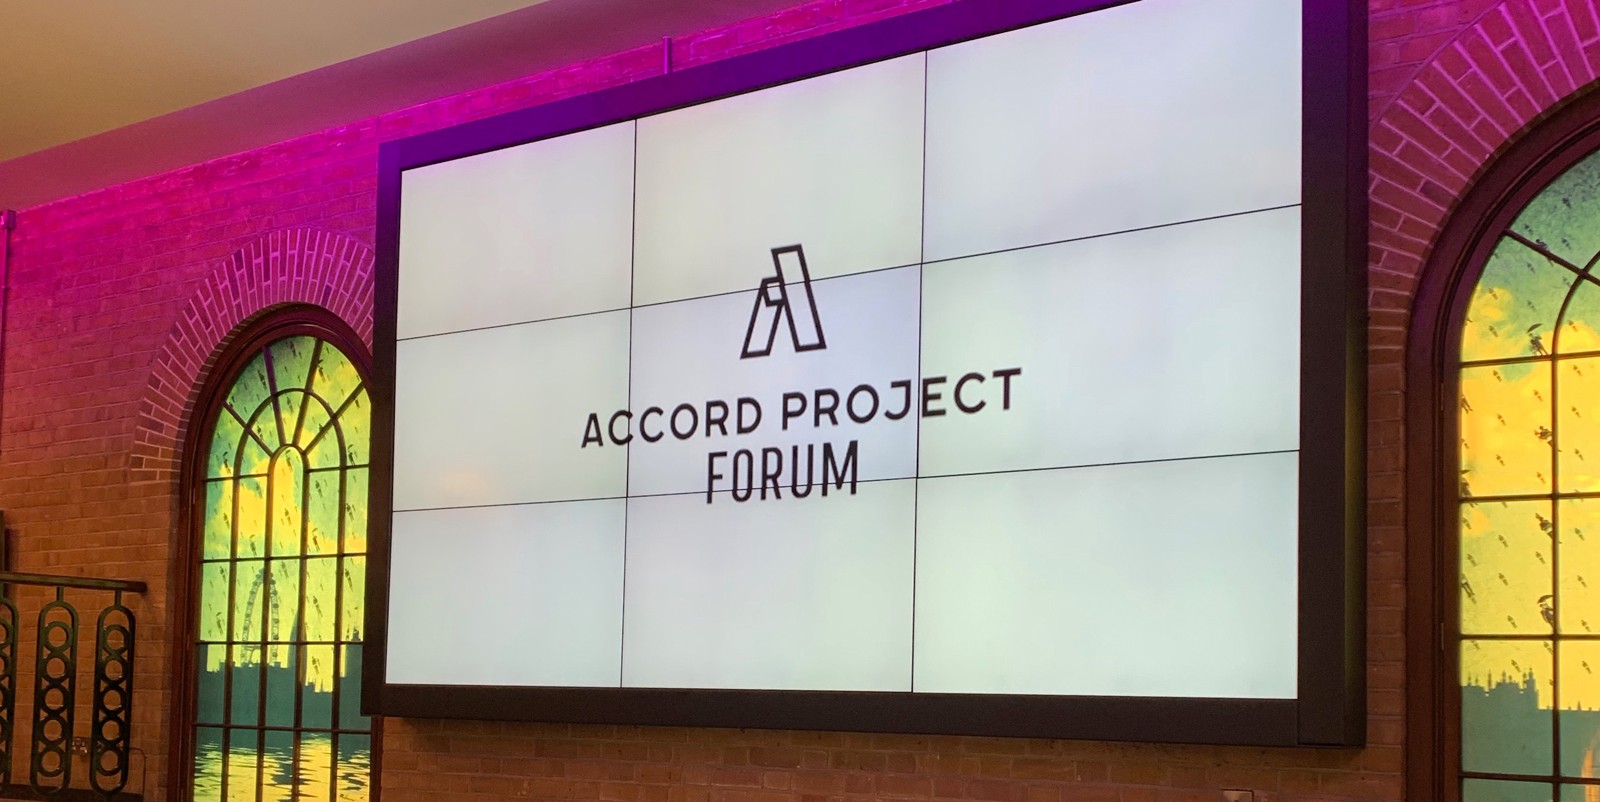 INDUSTRIA Becomes a Member of the Accord Project